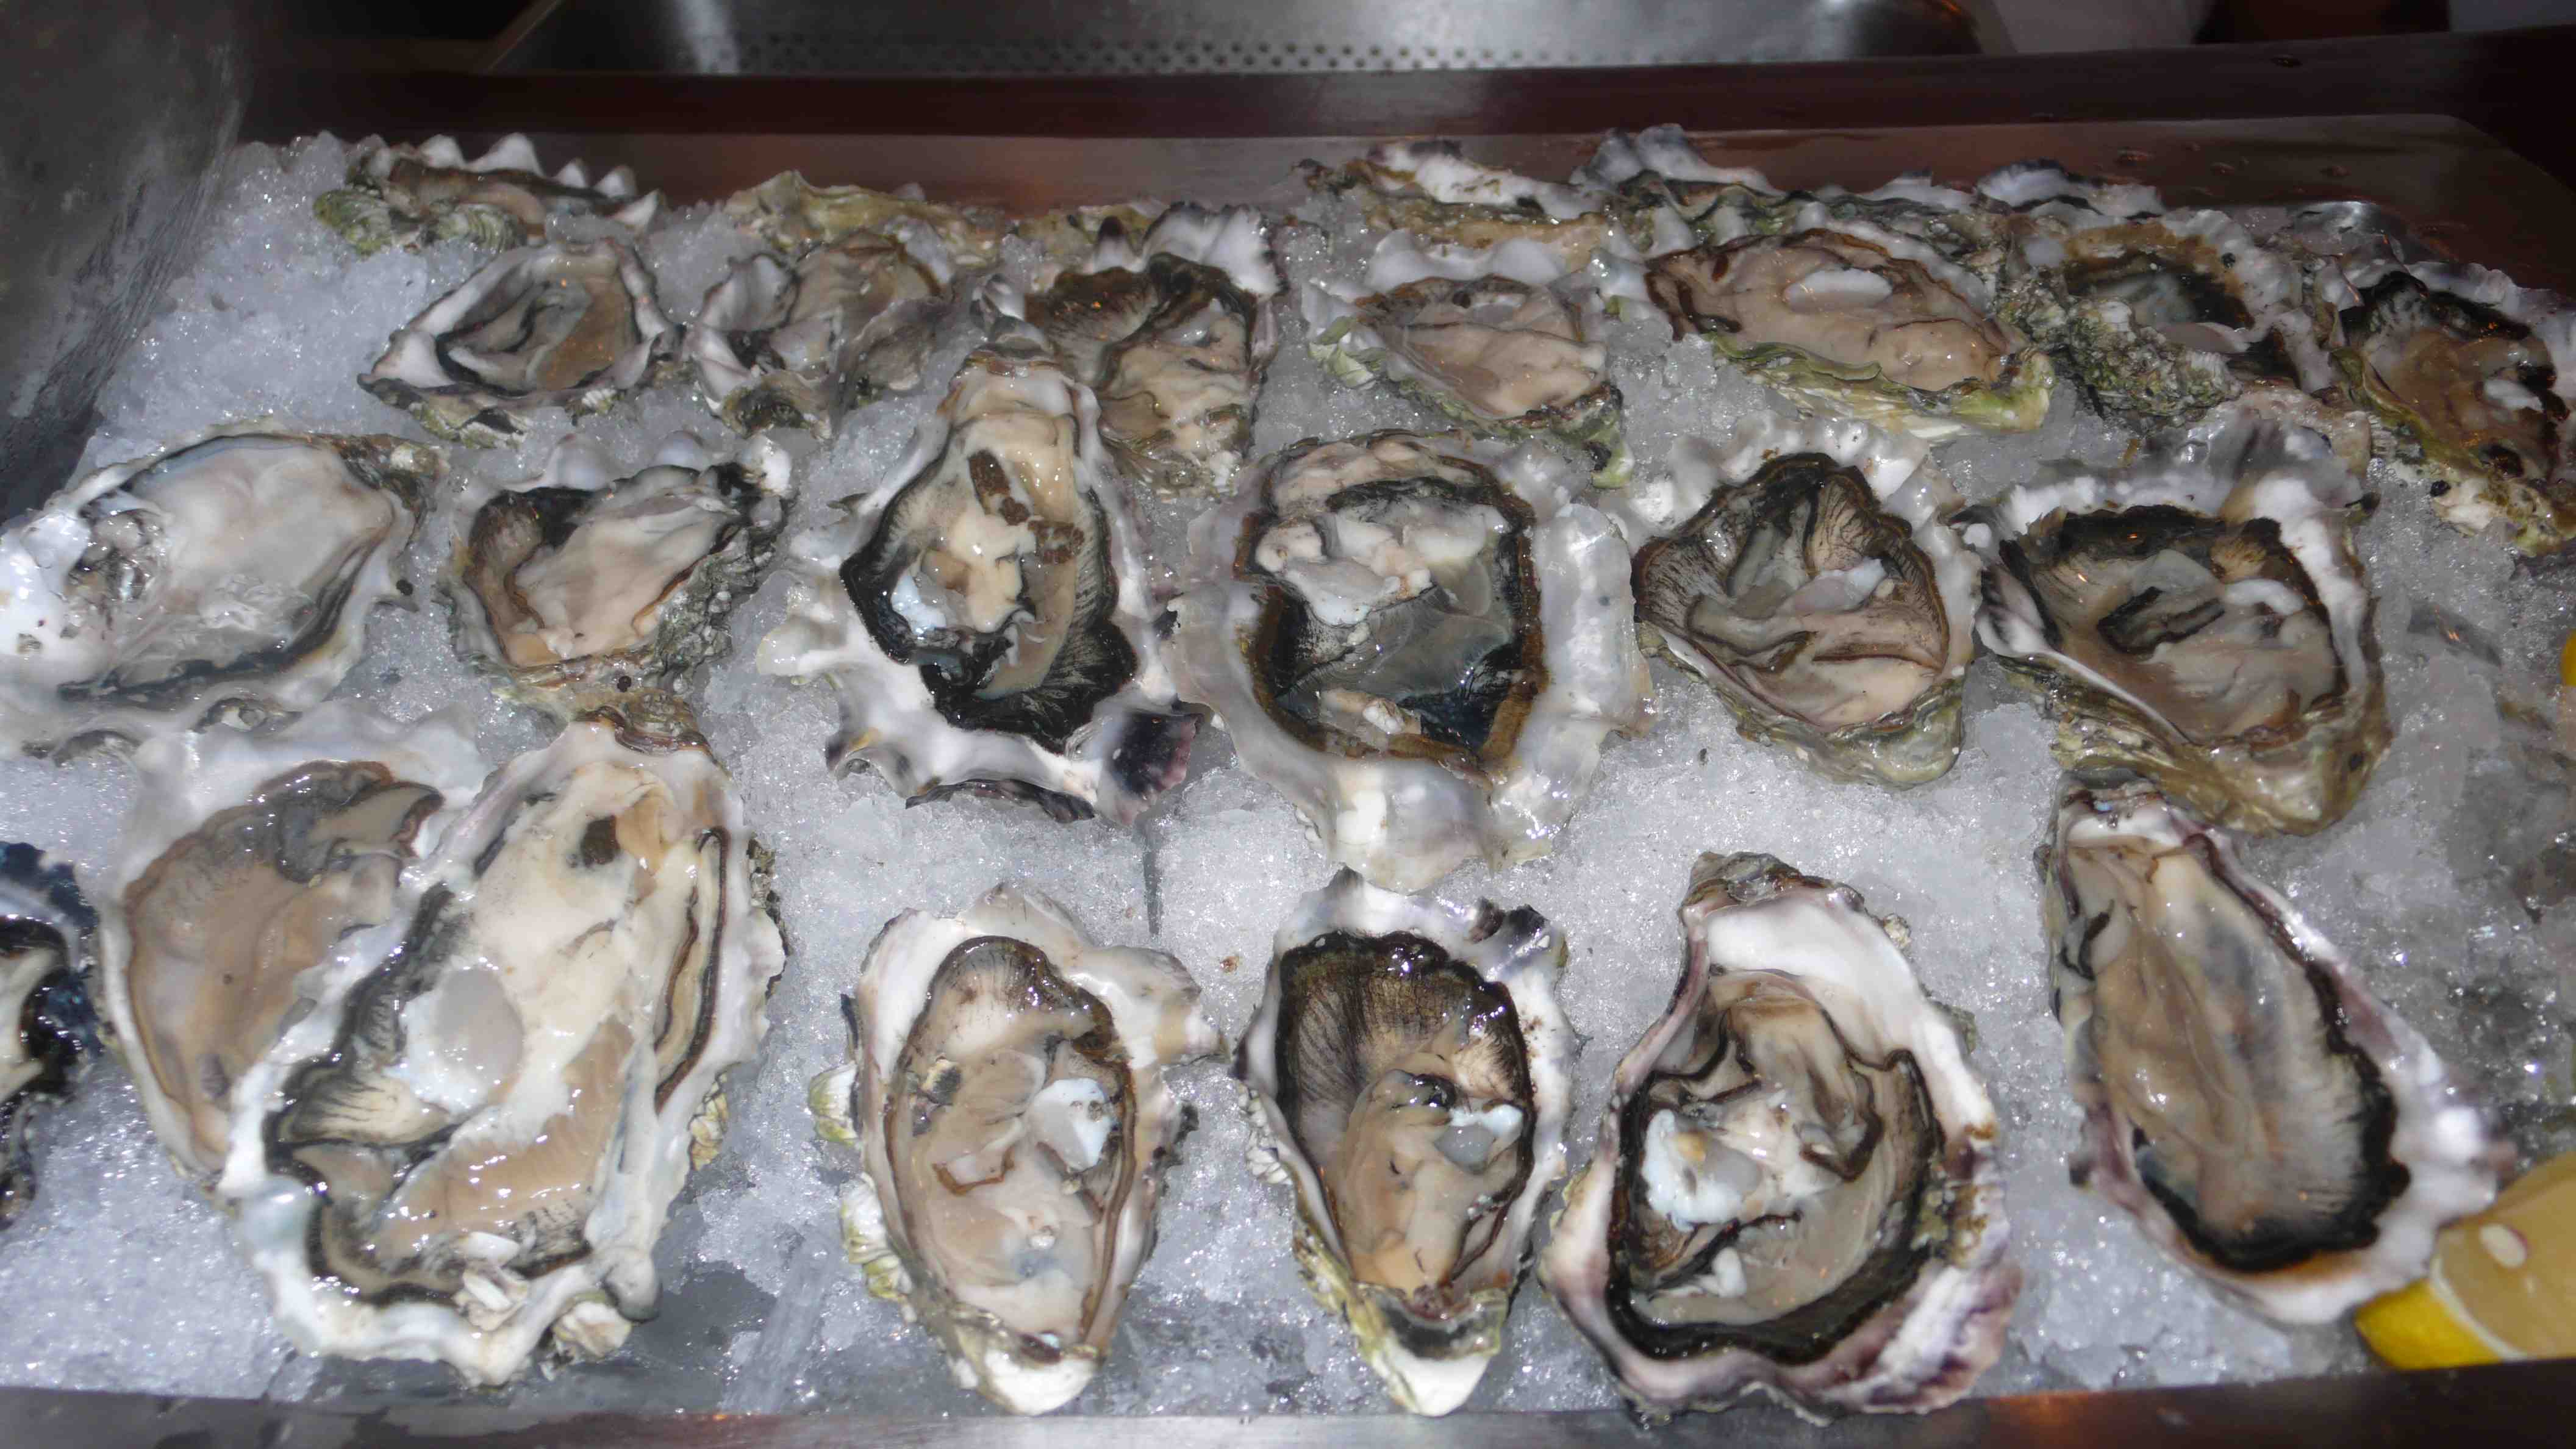 Oysters galore, yum.